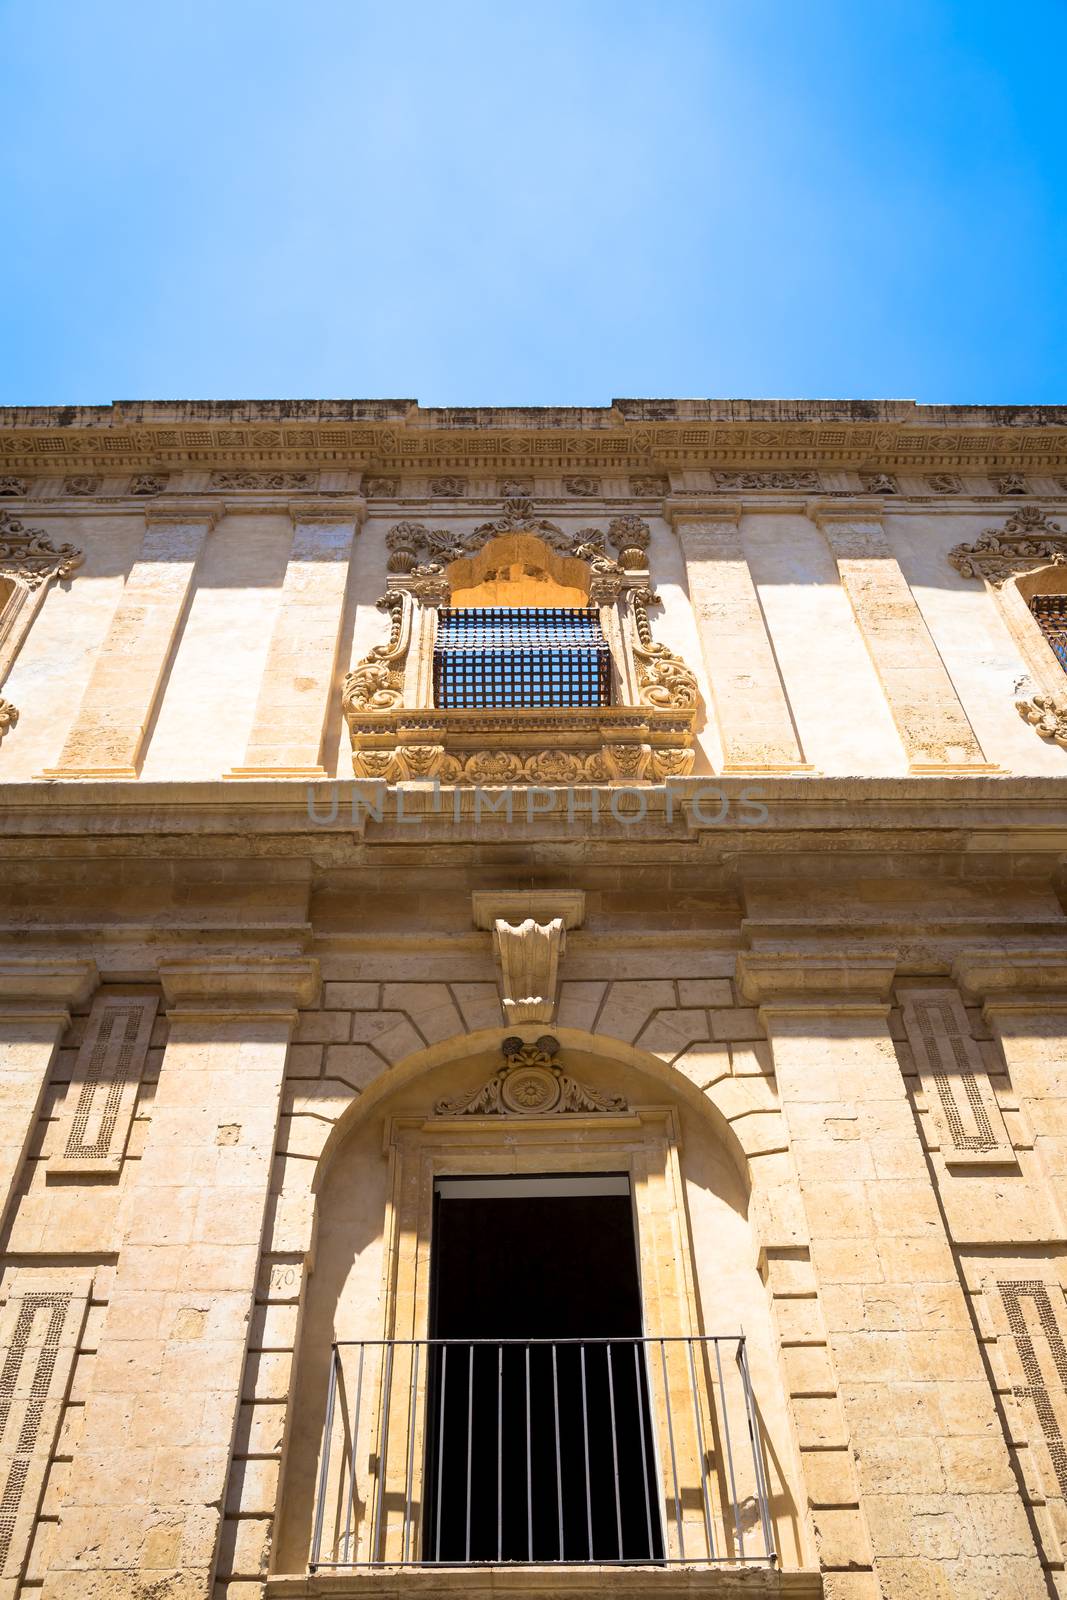 San Francesco is one of many new churches built after the city of Noto was virtually destroyed by the earthquake of 1693. Baroque style